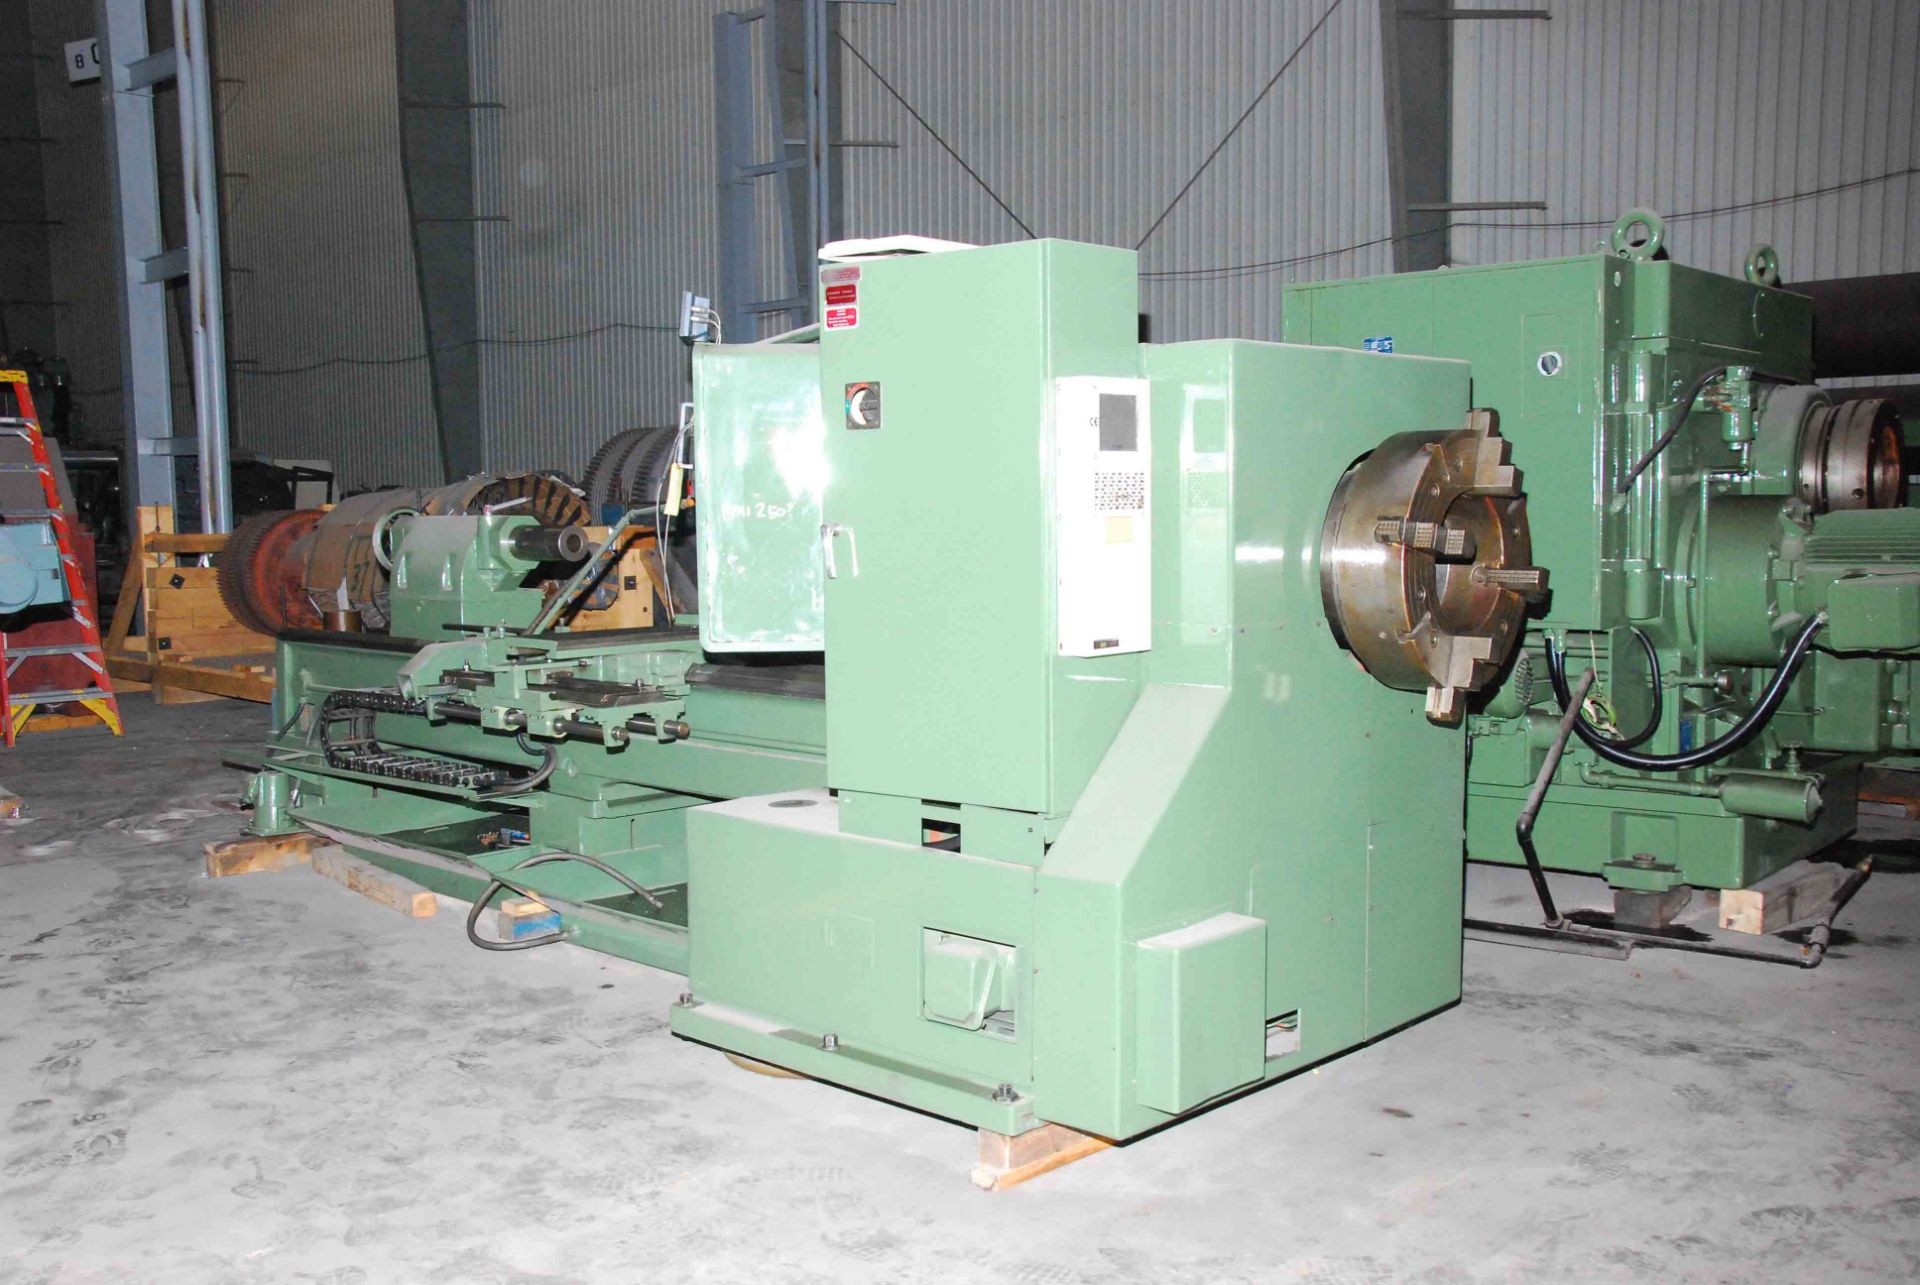 KINGSTON OIL COUNTRY MDL. HK-3000 HOLLOW SPINDLE LATHE, new 2007, 12/5” spdl. bore, 30” sw. bed, - Image 2 of 2